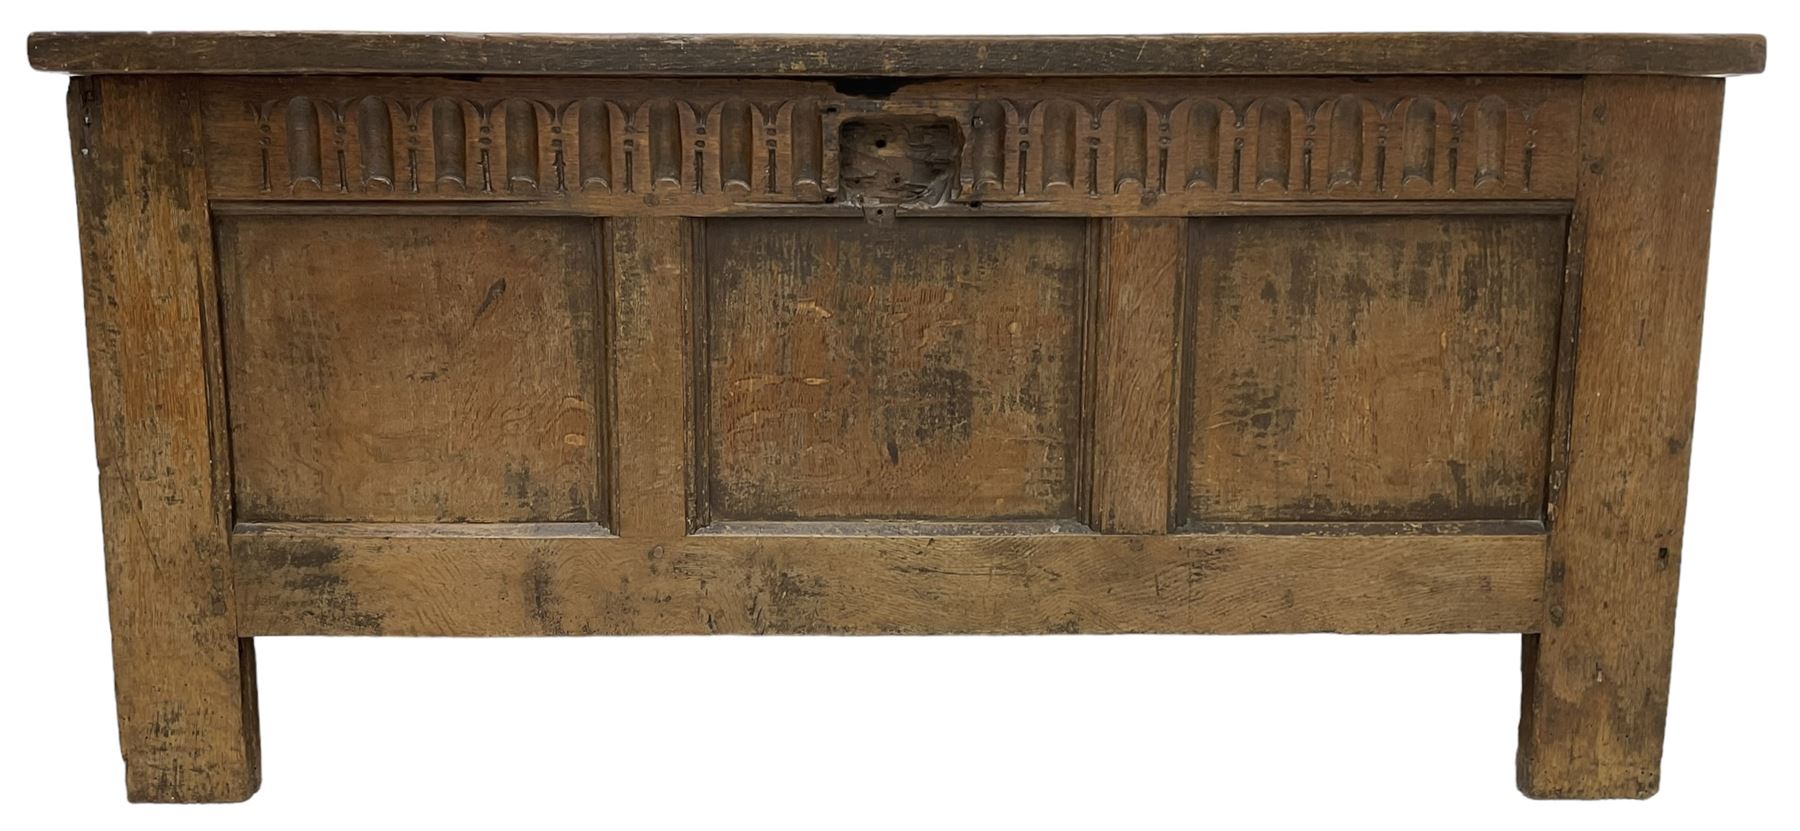 17th oak coffer or blanket chest - Image 4 of 6